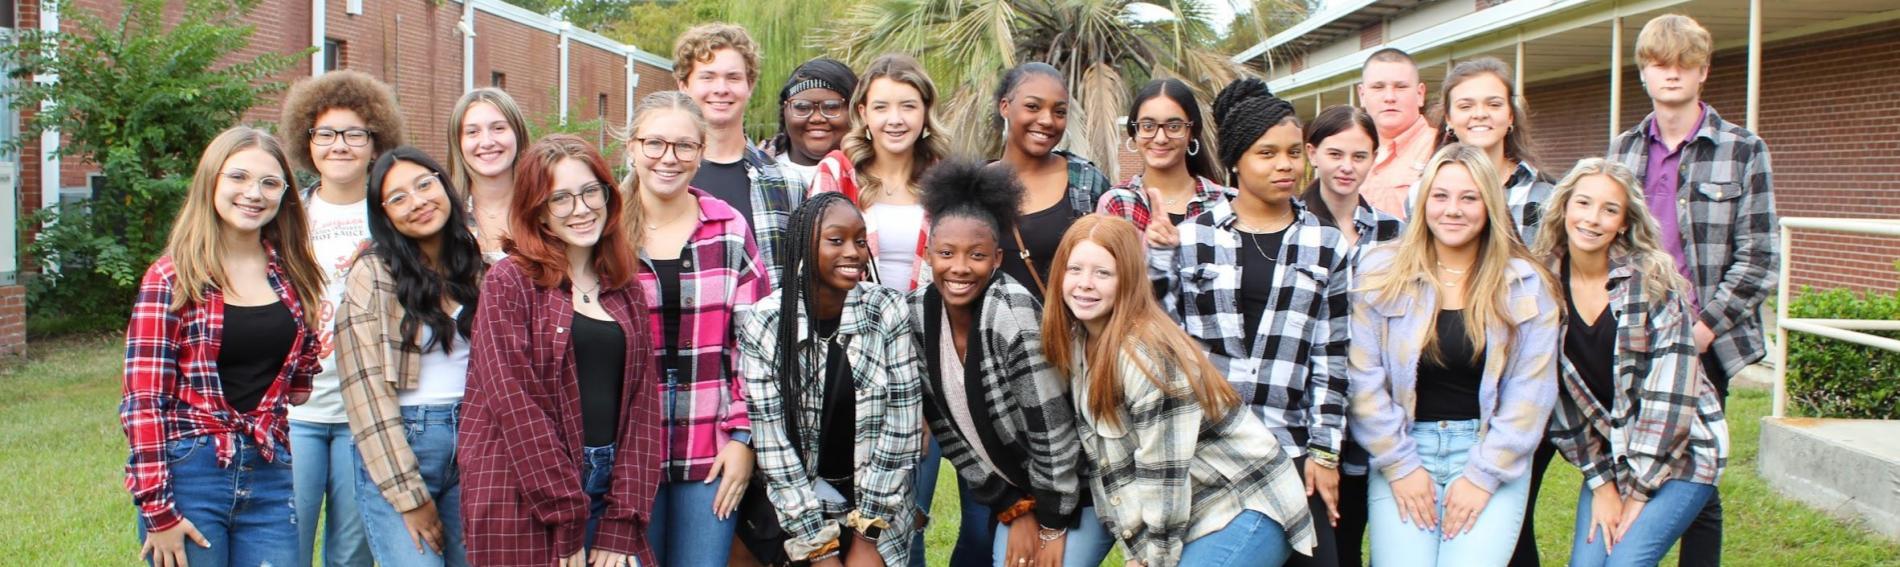 A large group of students pose together in flannel shirts on Flannel Day